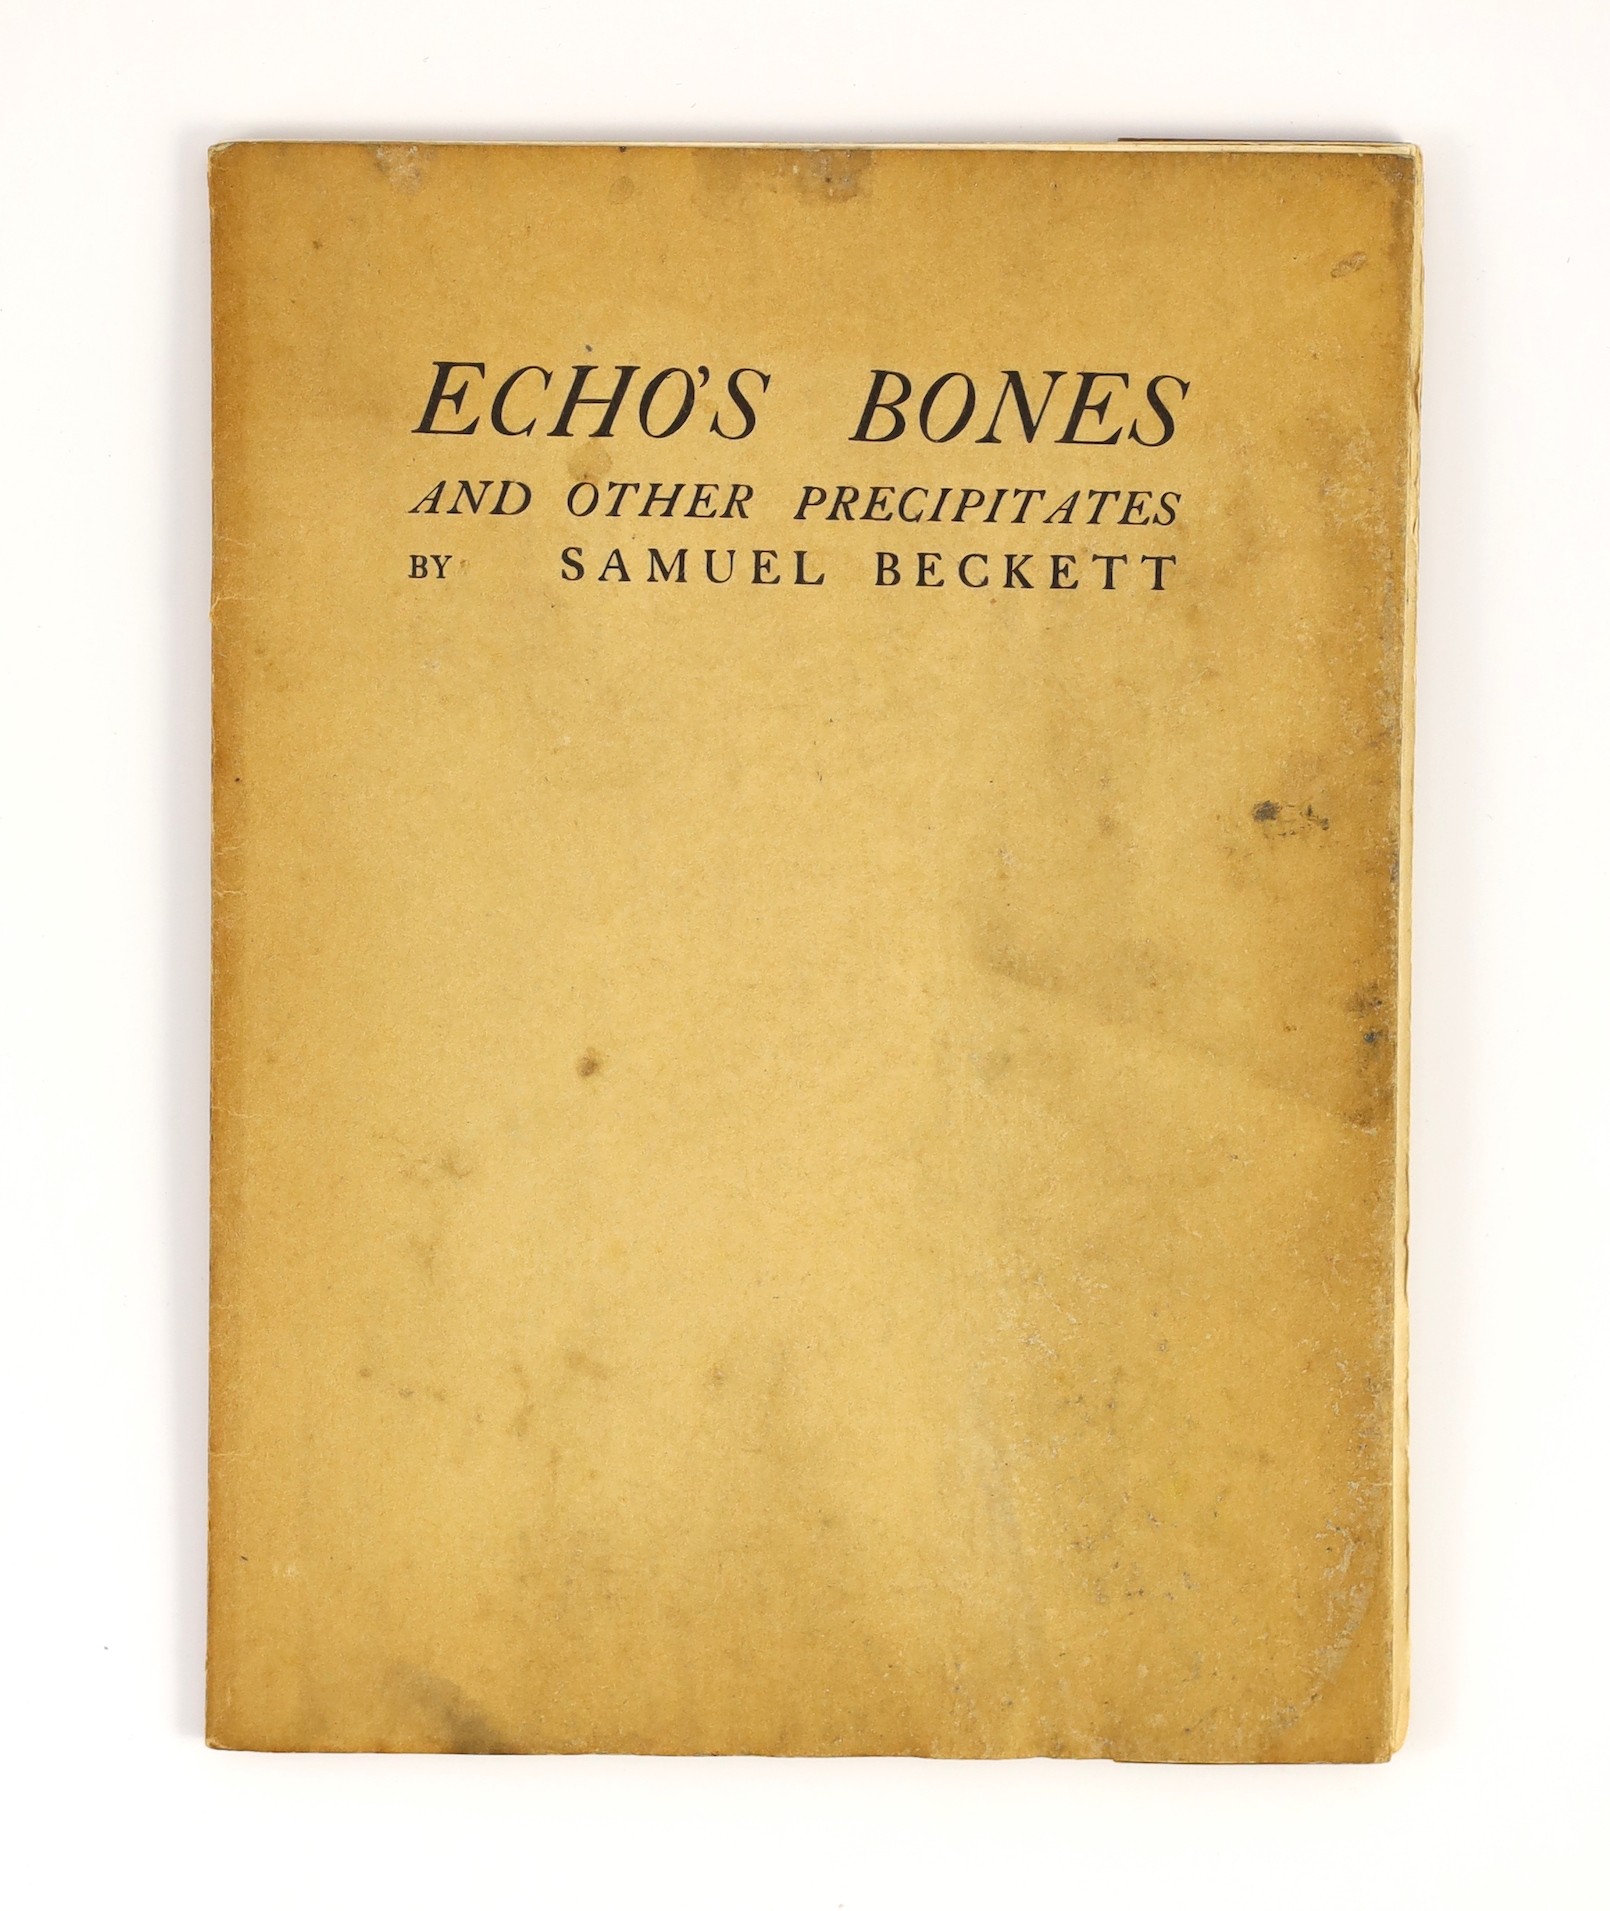 Beckett, Samuel - Echo’s Bones and Other Precipitates, 1st edition, one of 327, original wraps (soiled), stain to edge of front fly leaf, Europa Press, 1935